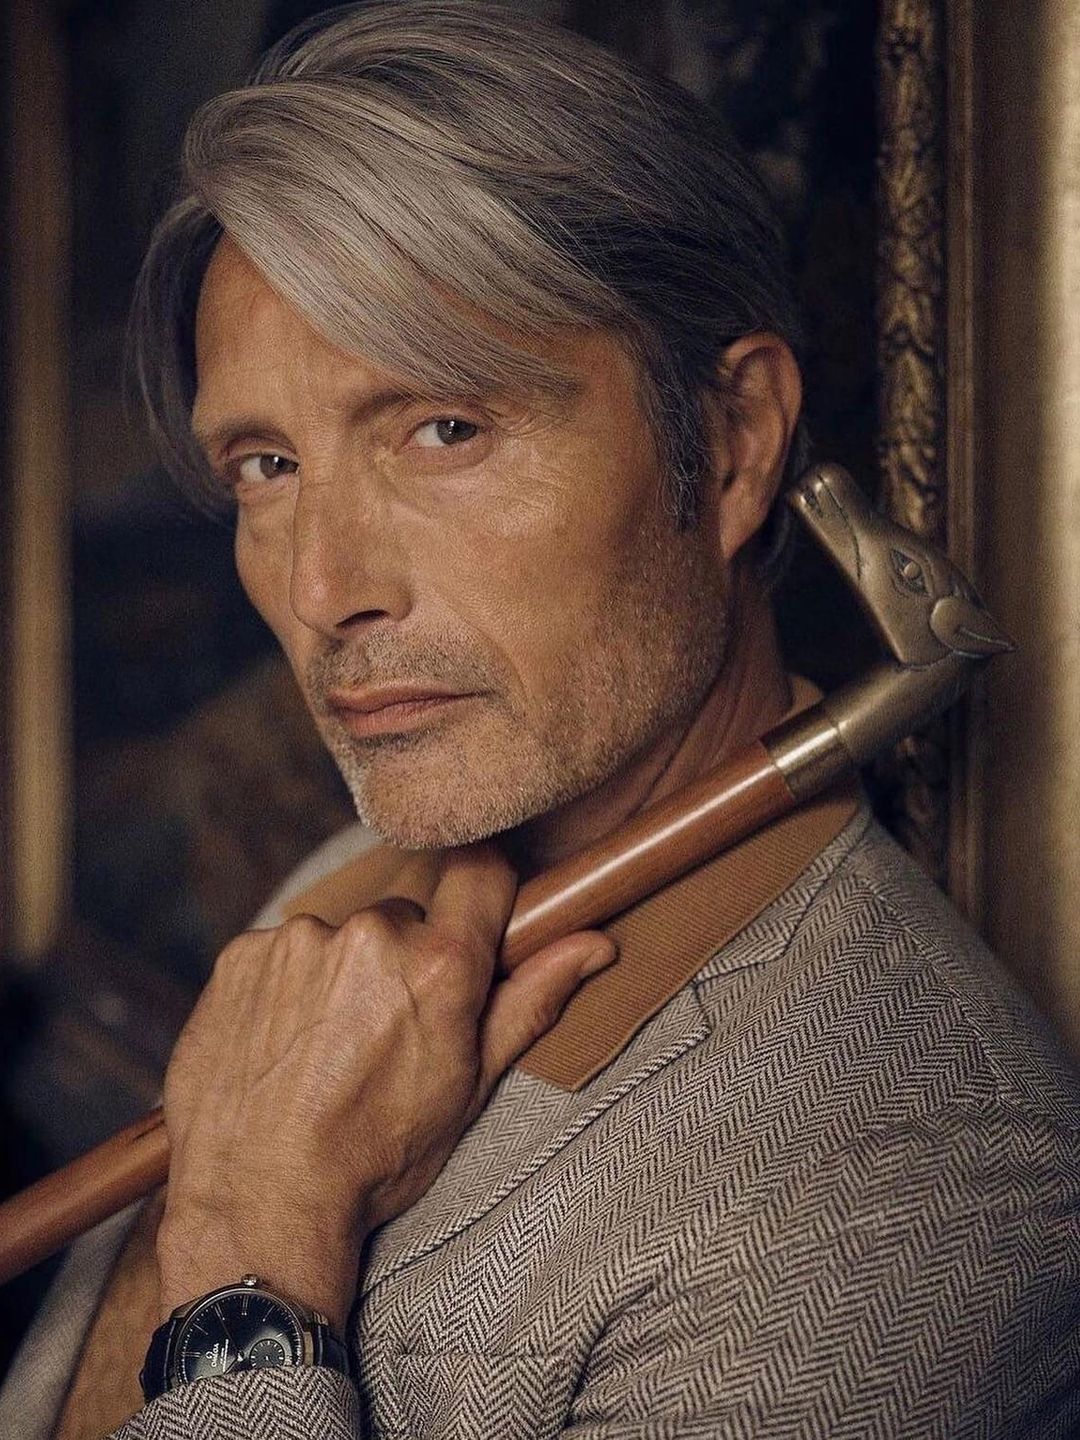 Mads Mikkelsen young age